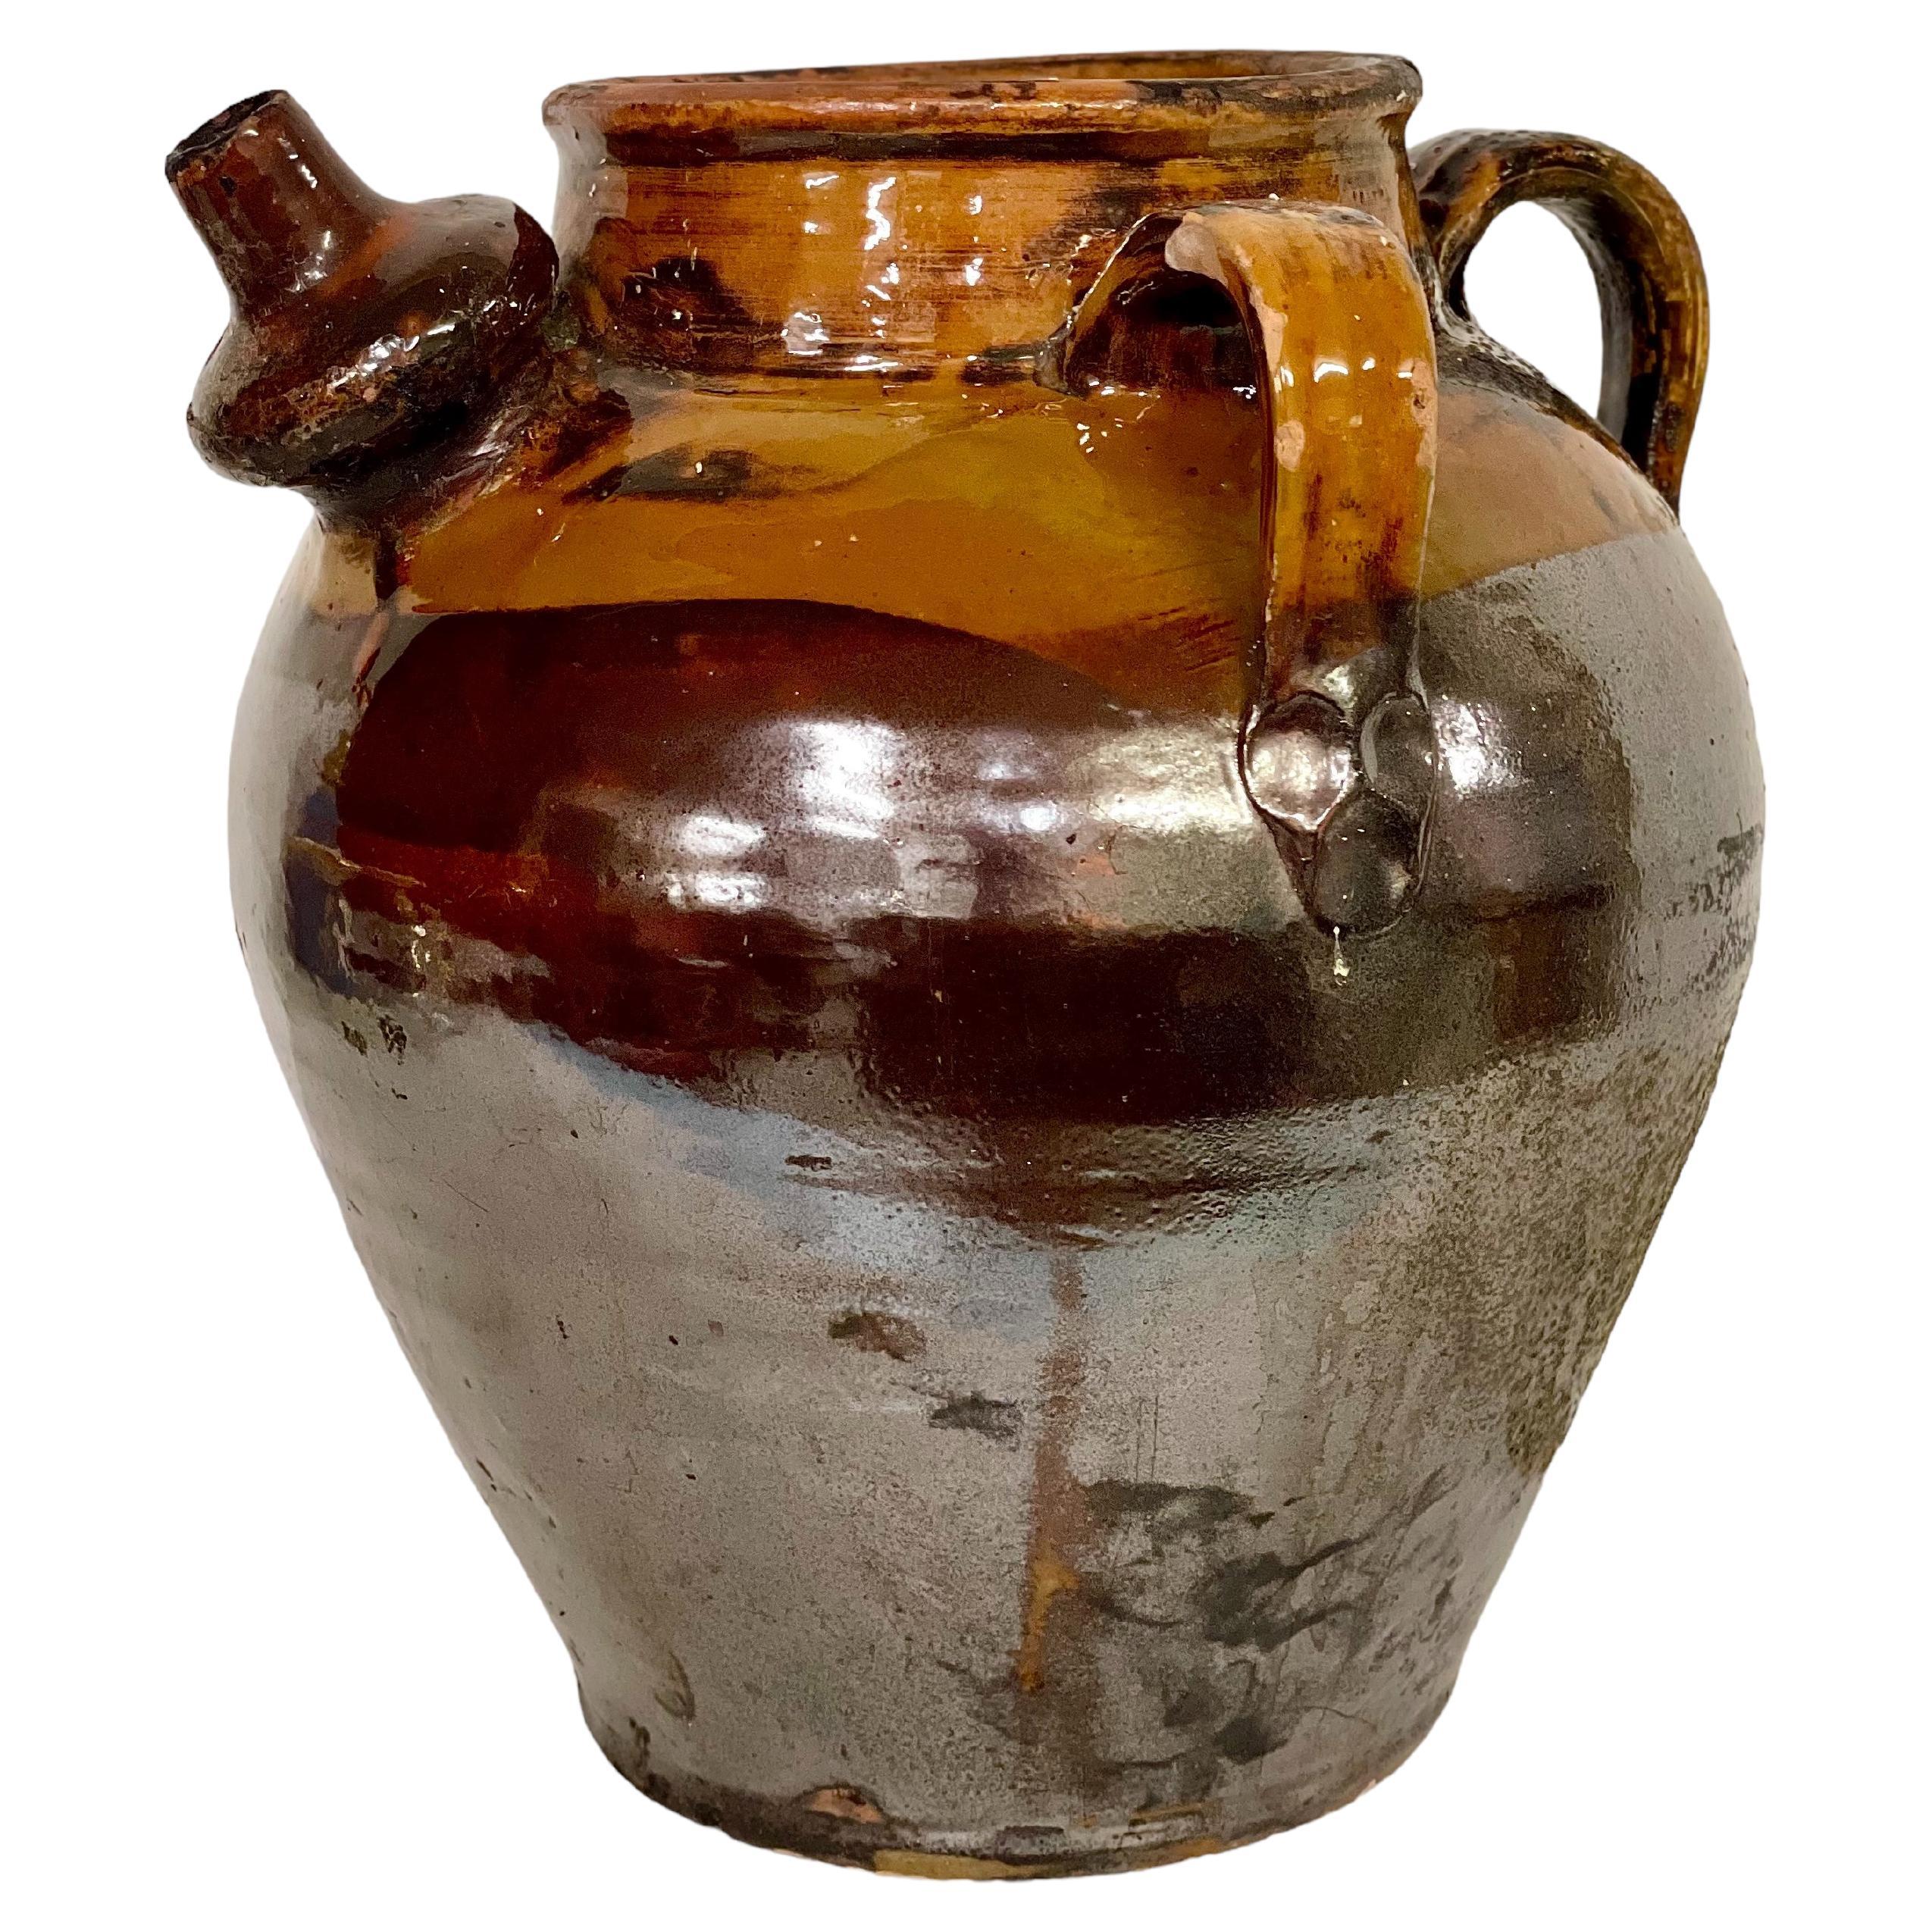 A.I.C. Brown and Yellow Glazed Oil Jar (JAR à huile)